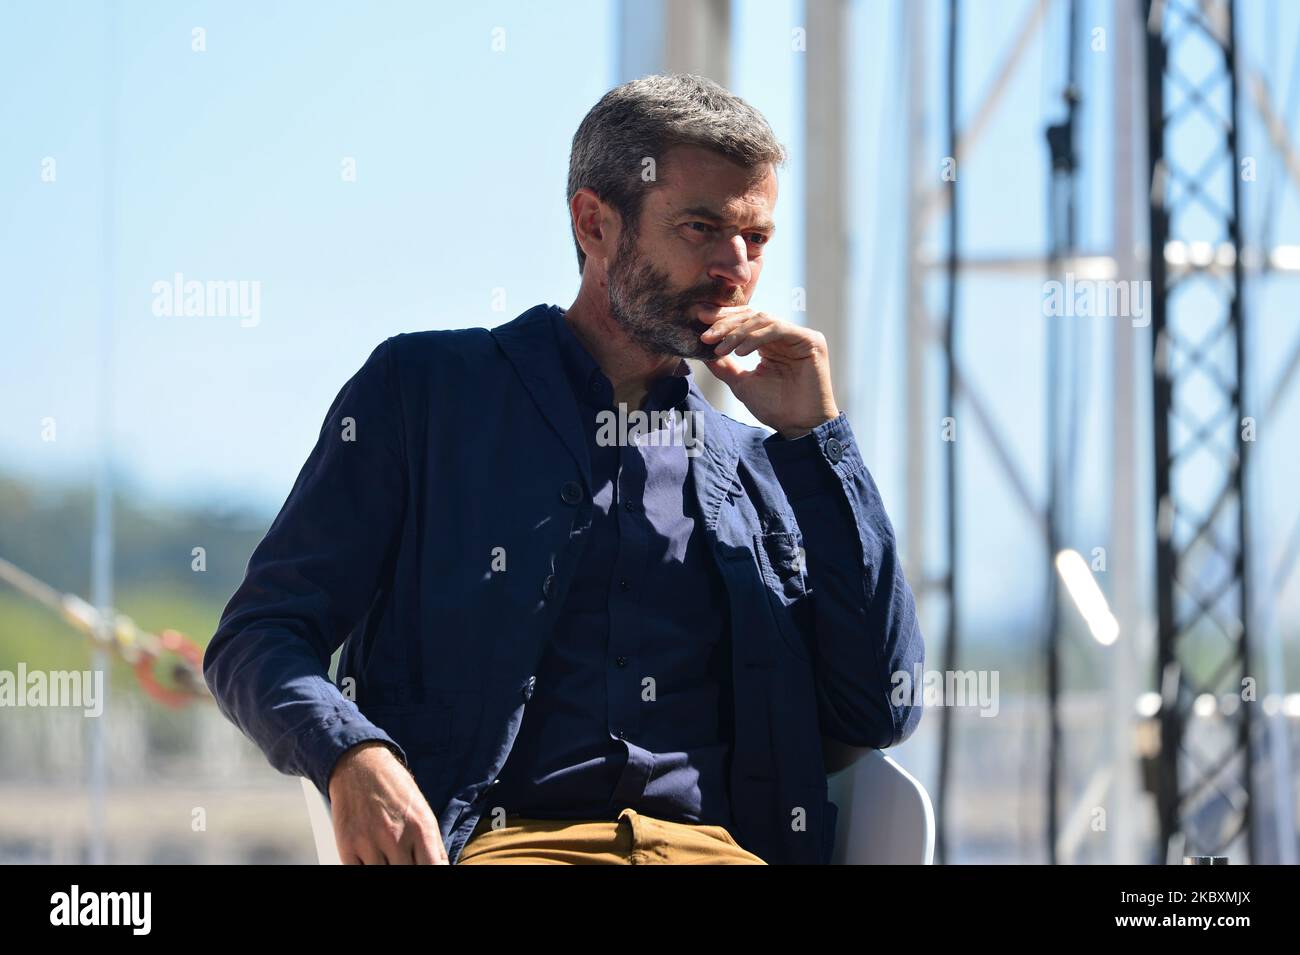 French Director of Greenpeace France Jean-FranÃ§ois Julliard attends at the meeting of French employers' association Medef themed 'The Renaissance of French Companies' - August 27, 2020, Paris (Photo by Daniel Pier/NurPhoto) Stock Photo